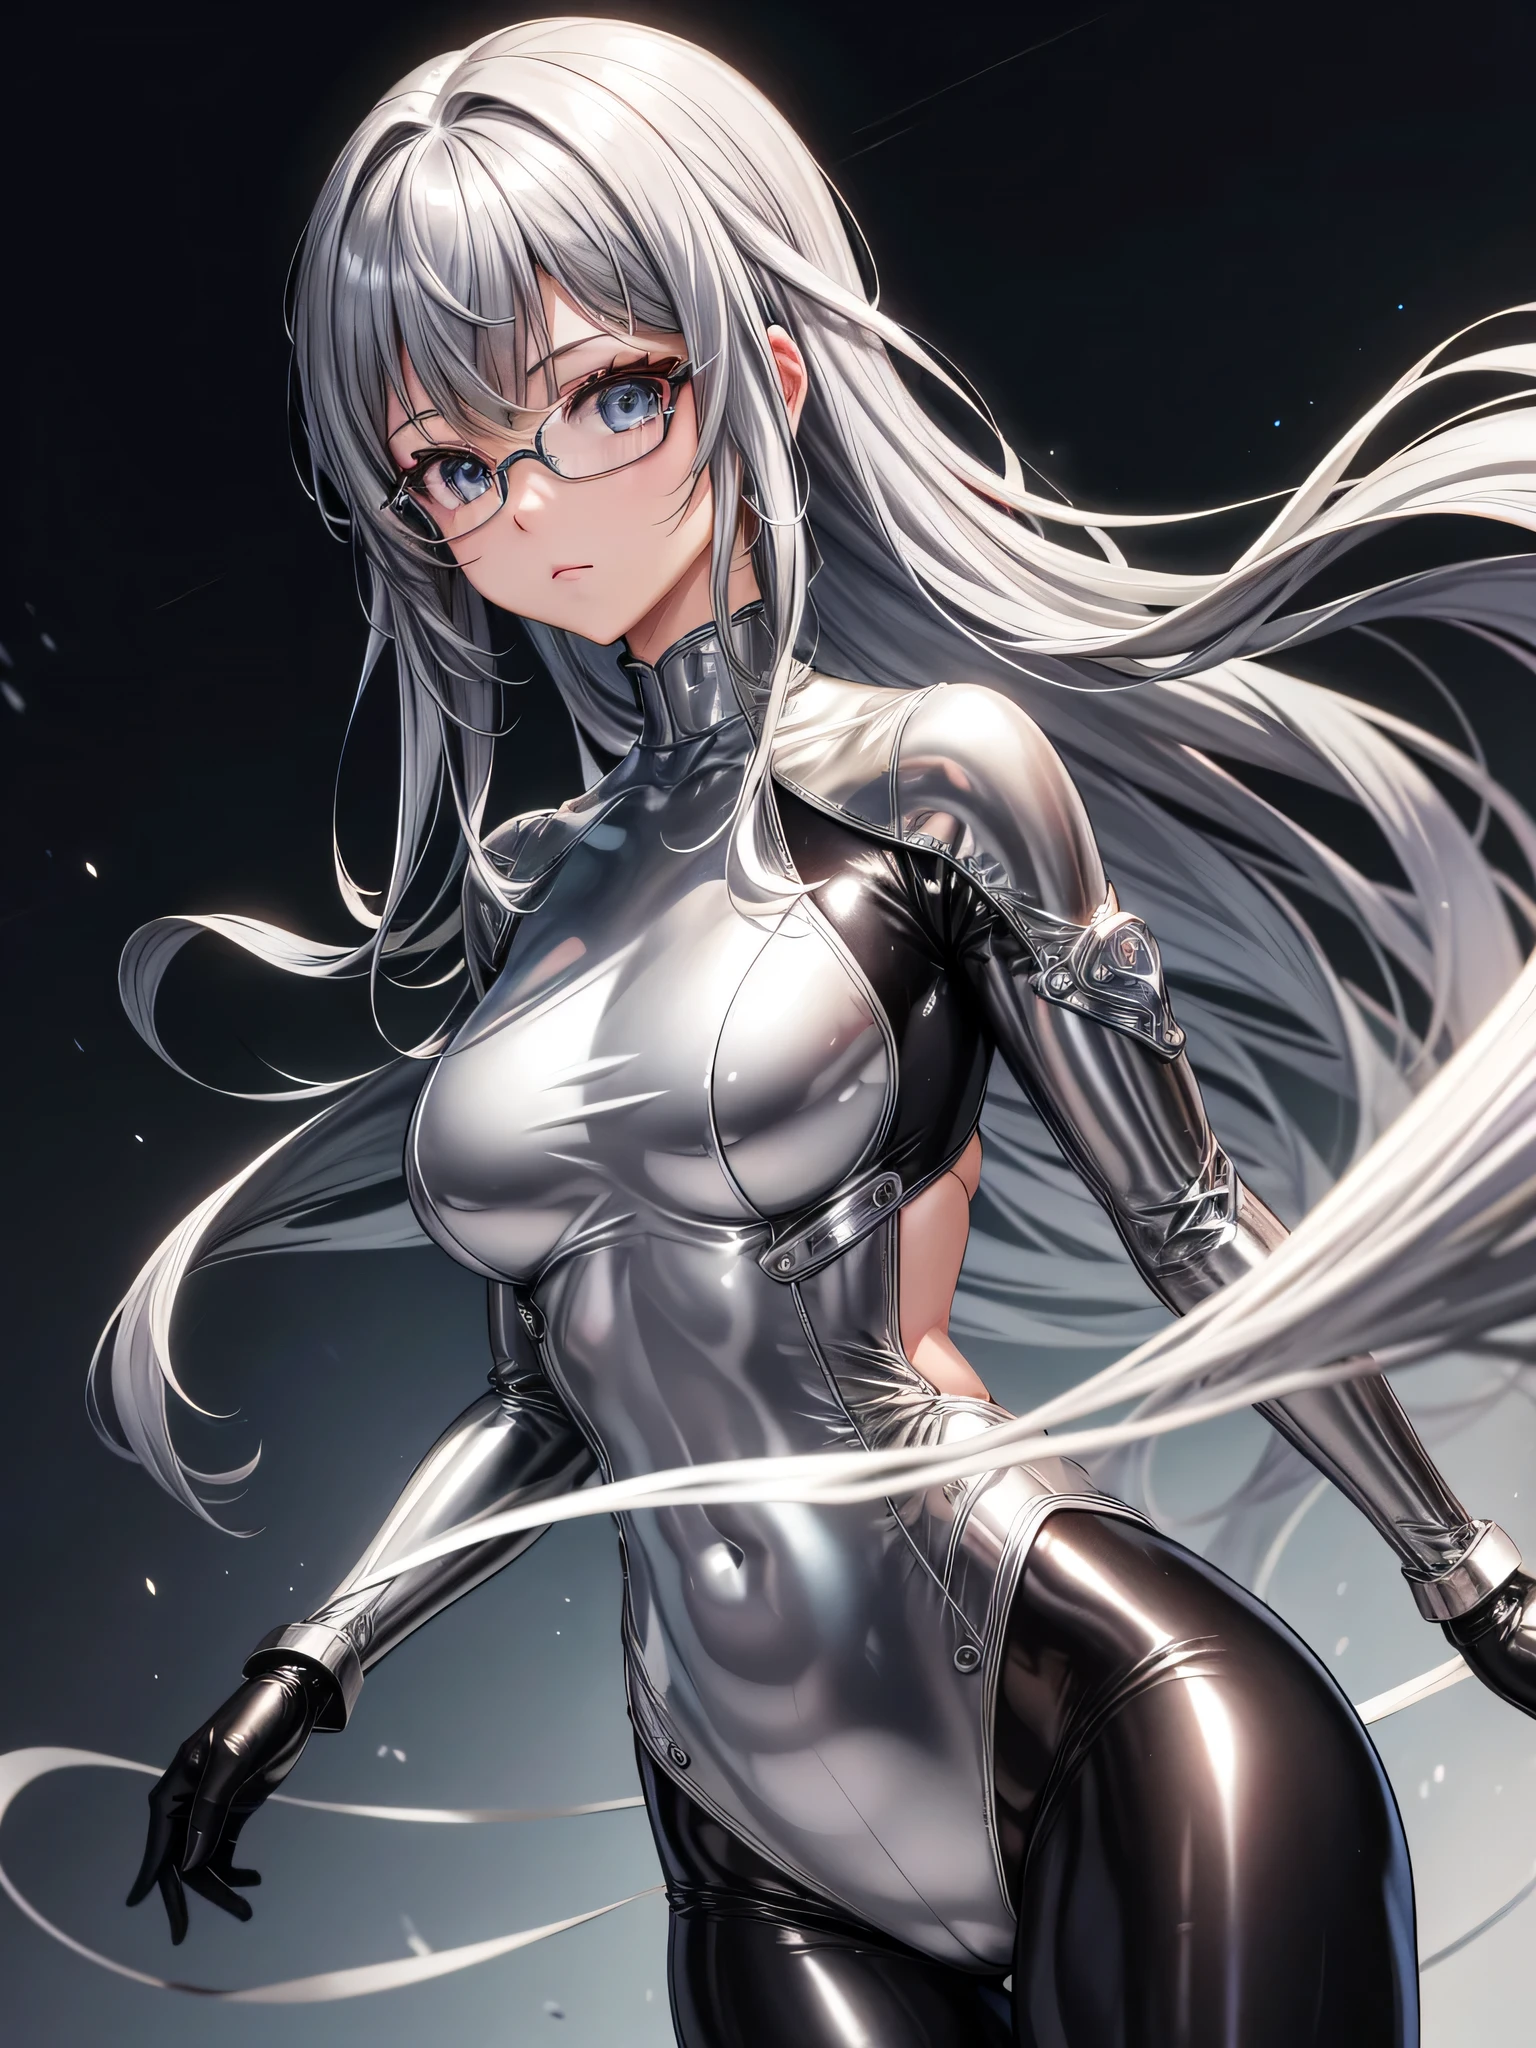 Top quality 8K UHD、glasses、silver metallic bodysuit、silver body tights、silver metallic tights、silver metallic rider suit、short hair、A beautiful short-haired woman wearing glasses、upper body up、